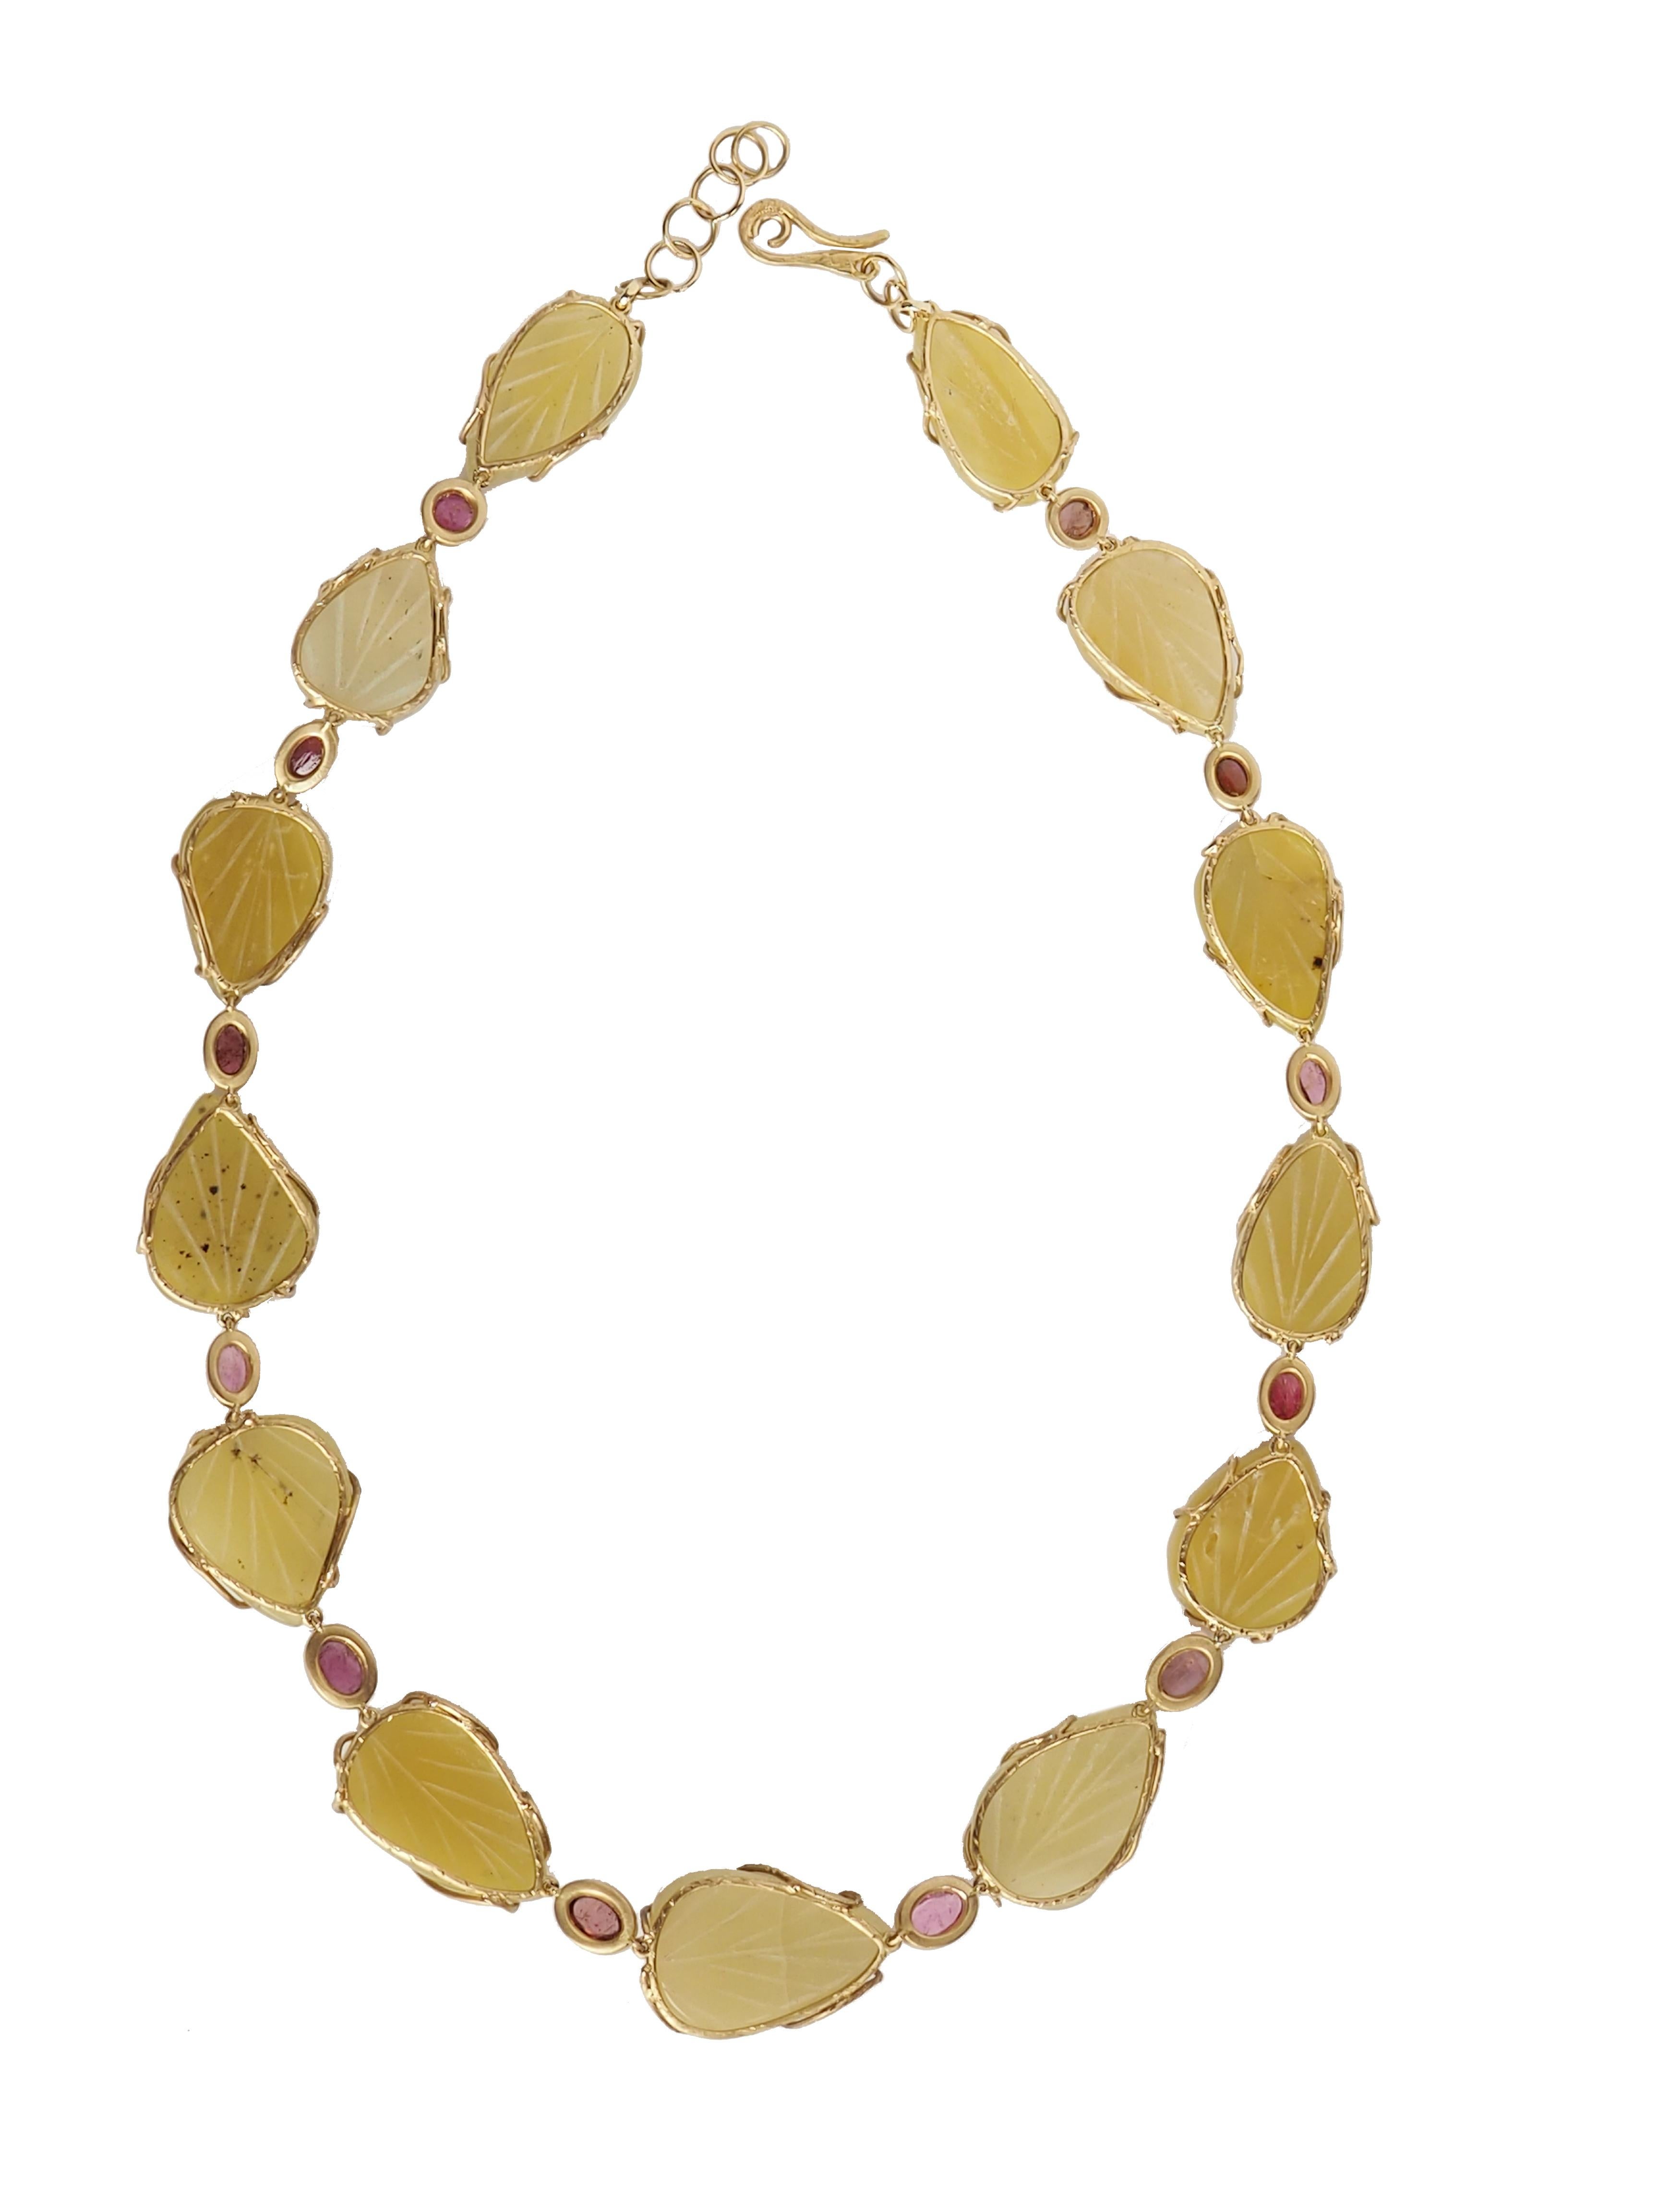 Very nice necklace with leaf in opal 18kt gold gr. 21,40, pink cabochon  tourmaline cts 12.
The measure is adjustable.
All Giulia Colussi jewelry is new and has never been previously owned or worn. Each item will arrive at your door beautifully gift